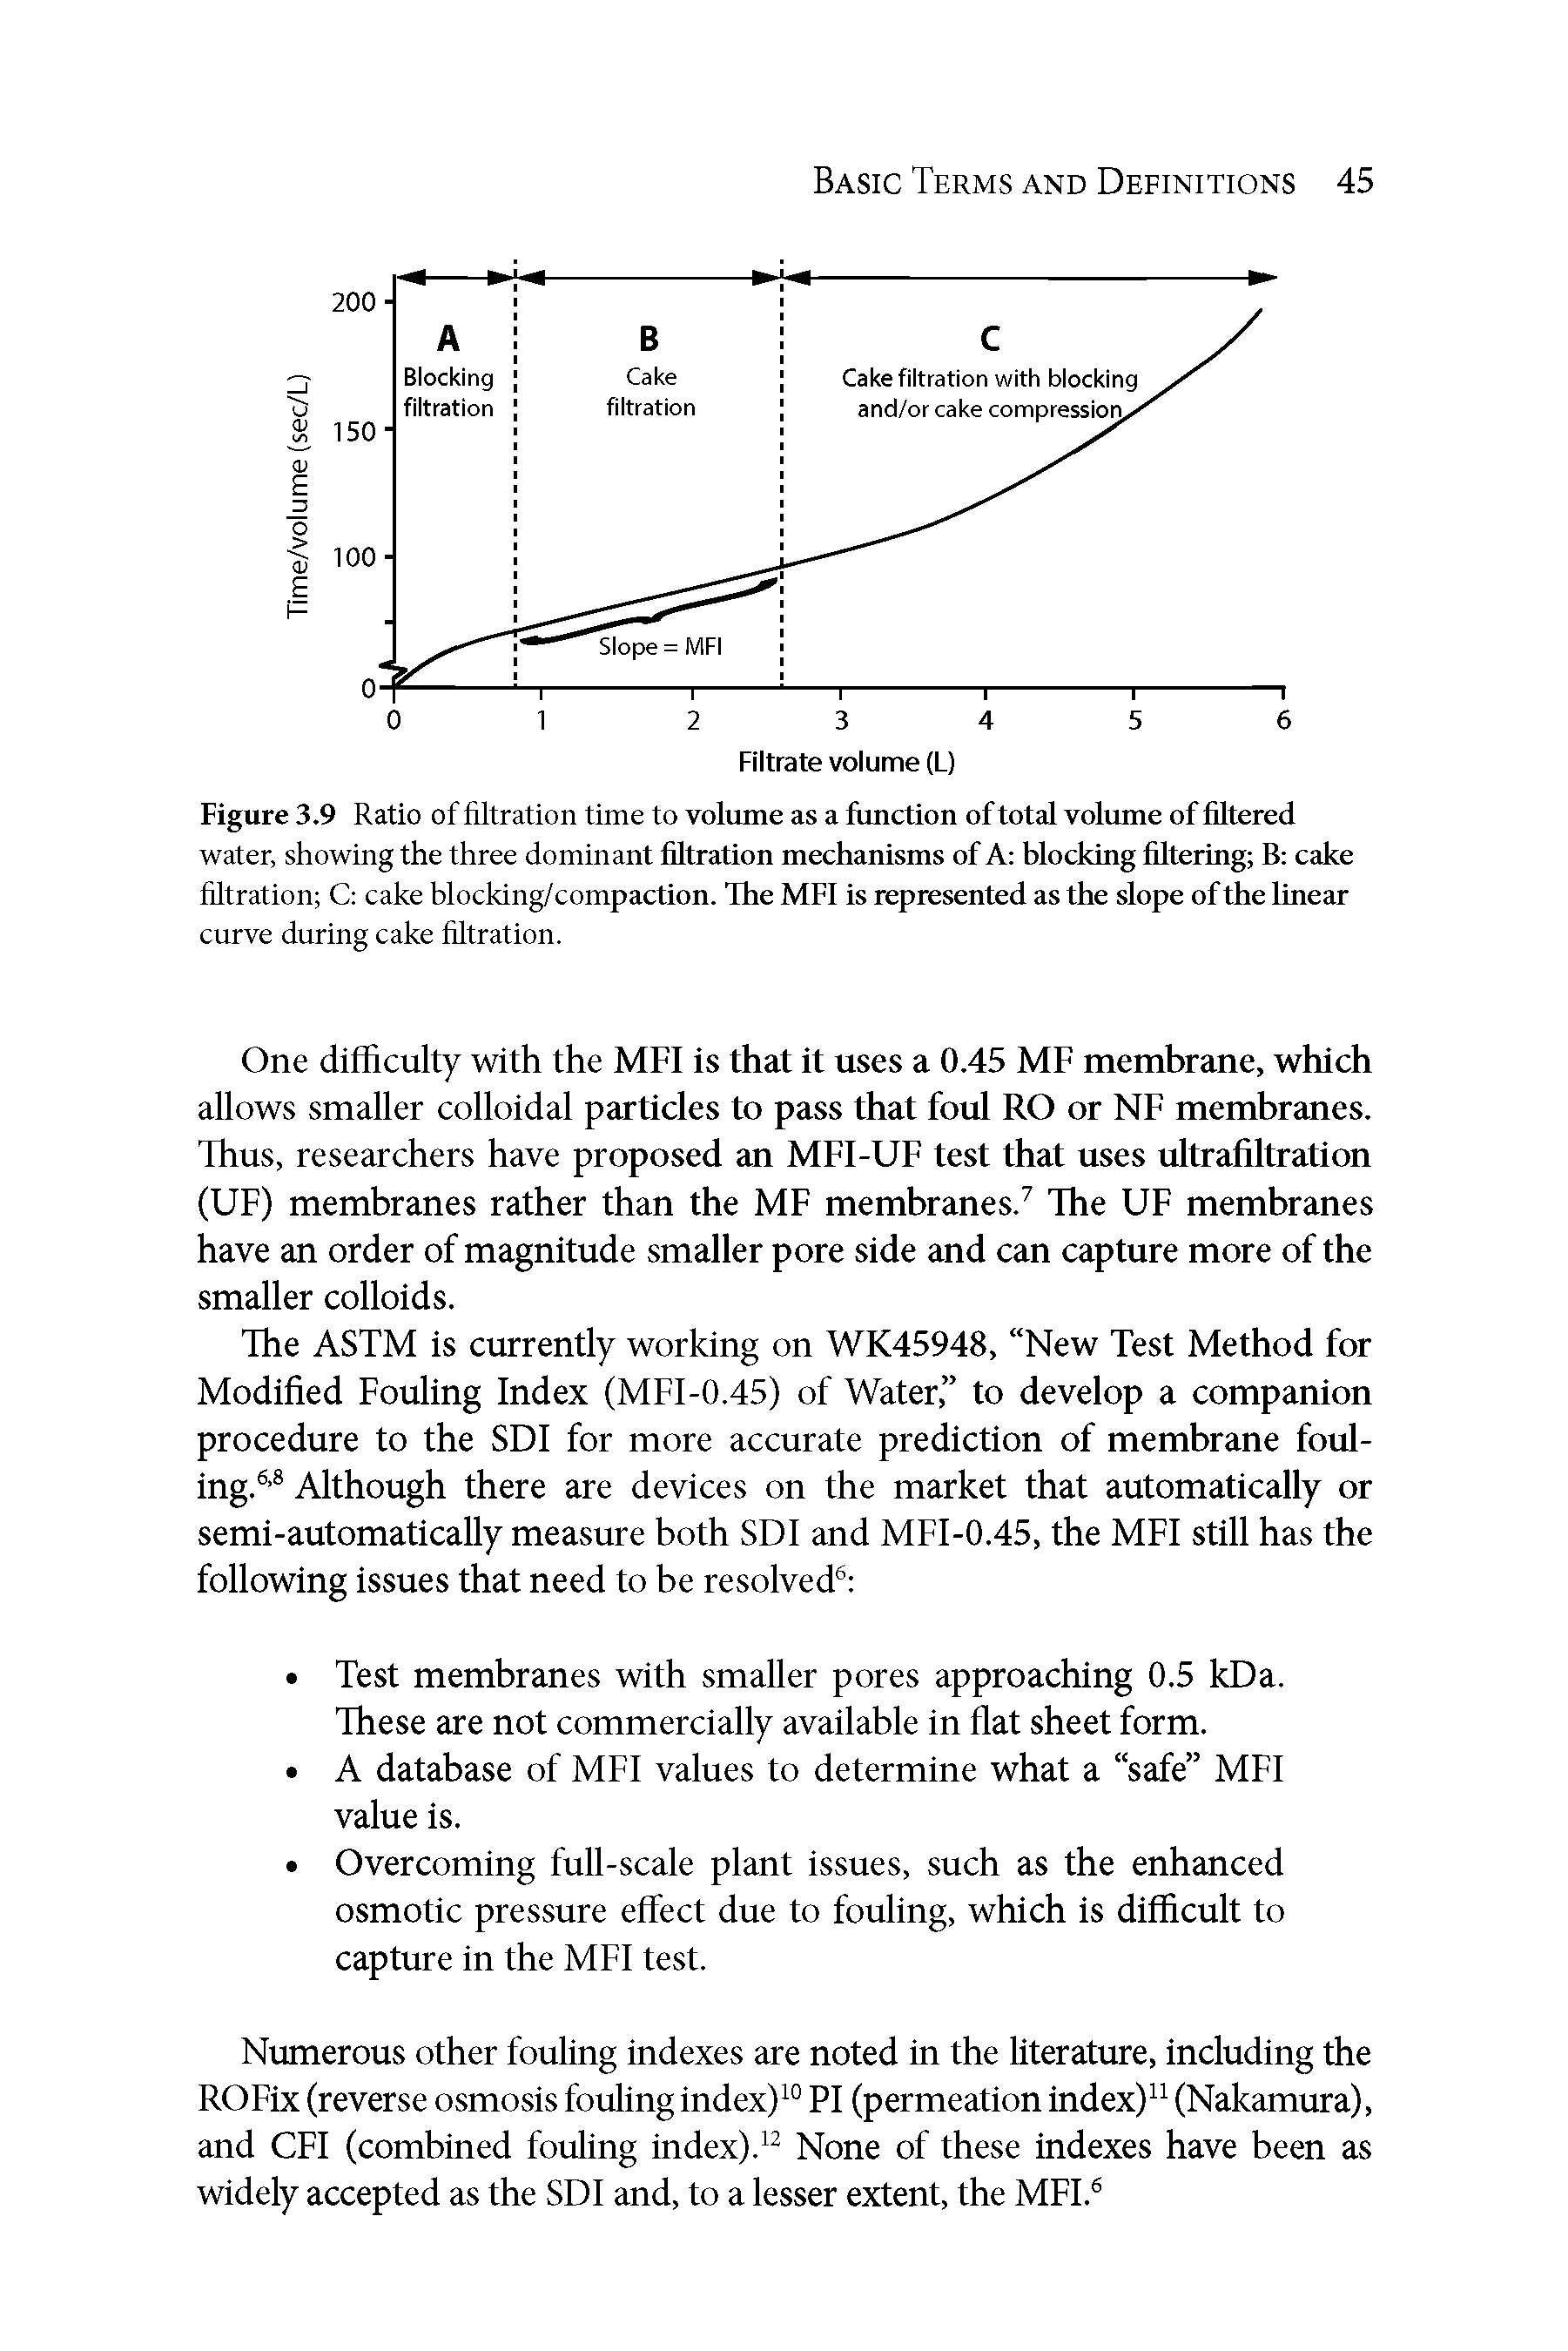 Figure 3.9 Ratio of filtration time to volume as a fimction of total volume of filtered water, showing the three dominant filtration mechanisms of A blocking filtering B cake filtration C cake blocking/ compaction. The MFl is represented as the slope of the linear curve during cake filtration.